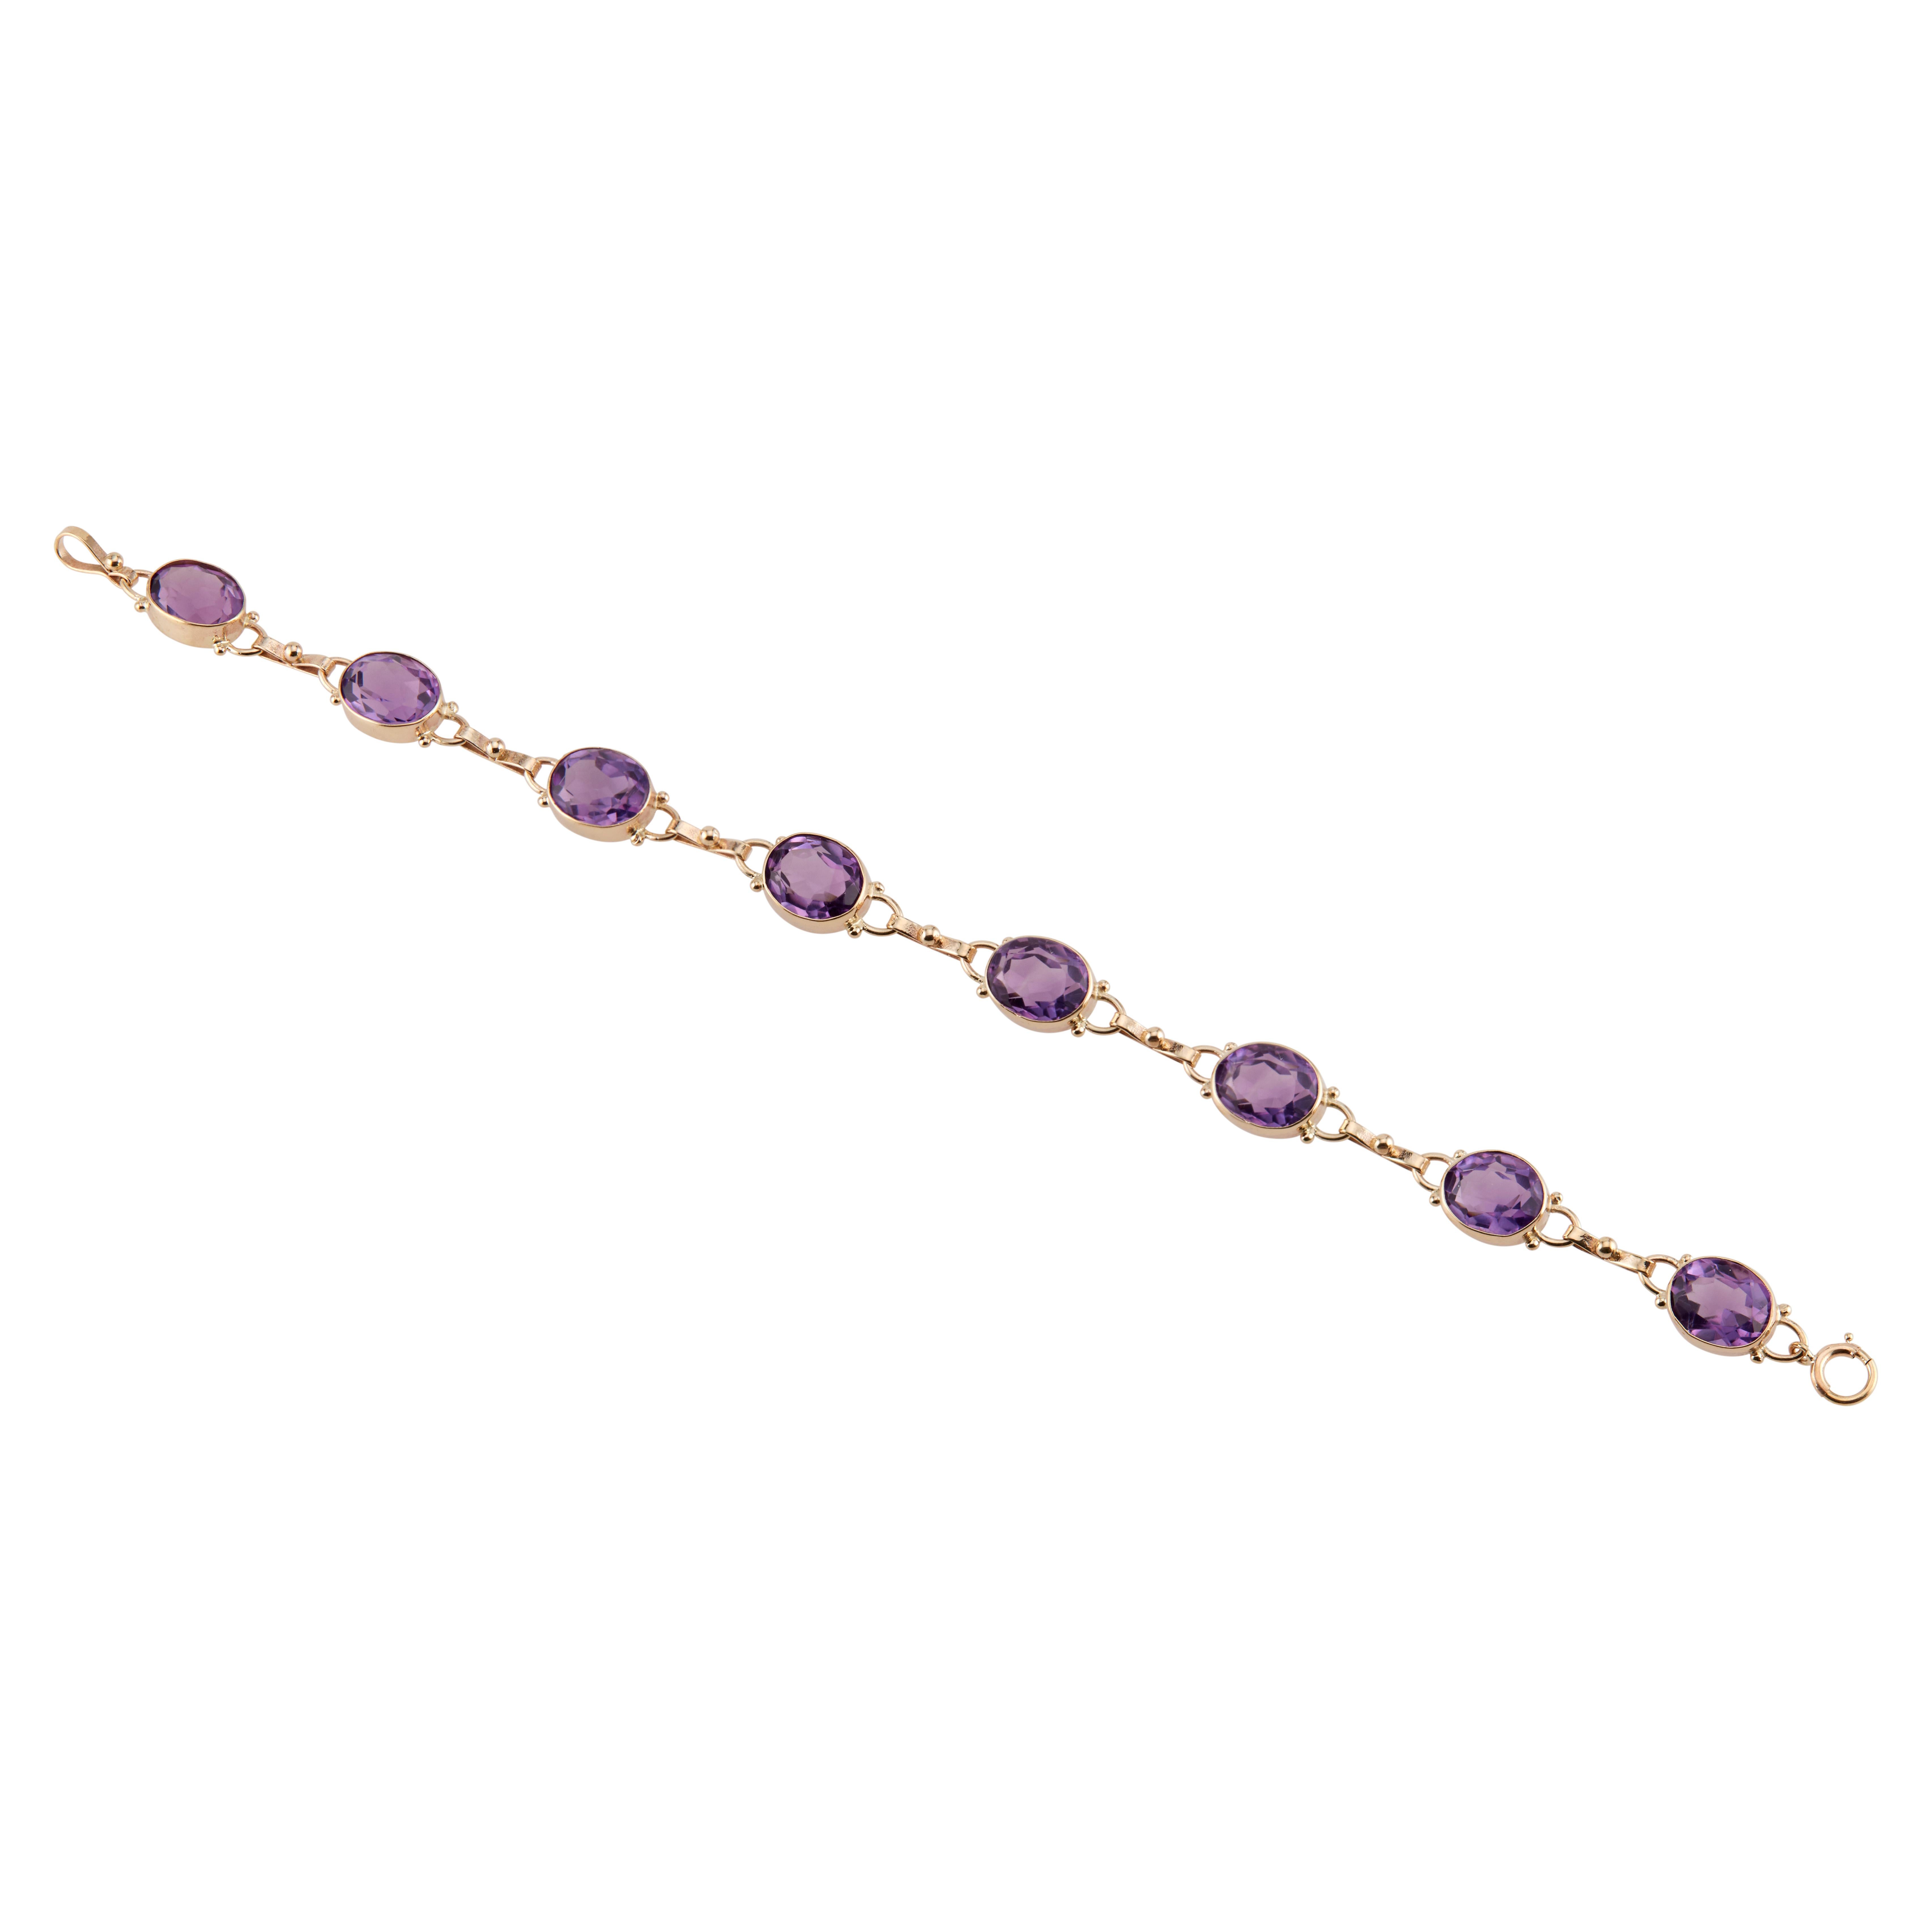 Vintage 1940's oval bezel set Amethyst bracelet in 14k yellow gold. 7.5 inches long. 

8 oval purple amethyst, approx. 14.00cts 
14k yellow gold 
Stamped: 14k
10.2 grams
Total length: 7.5 Inches
Width: 8.5mm 
Thickness/depth: 5.1mm

